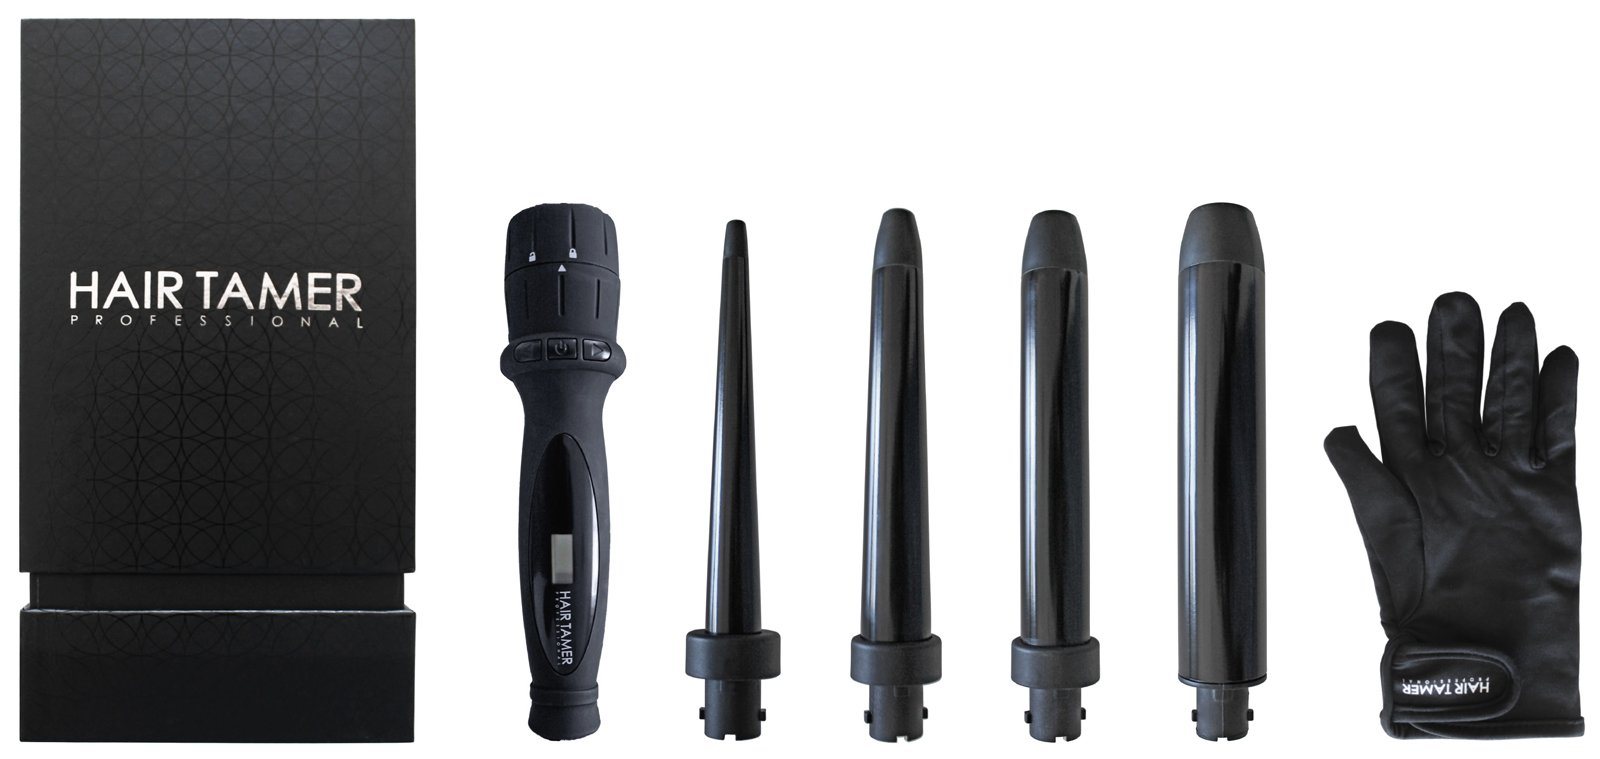 » Hair Tamer 4-in-1 Clipless Curling Iron Set (100% off)